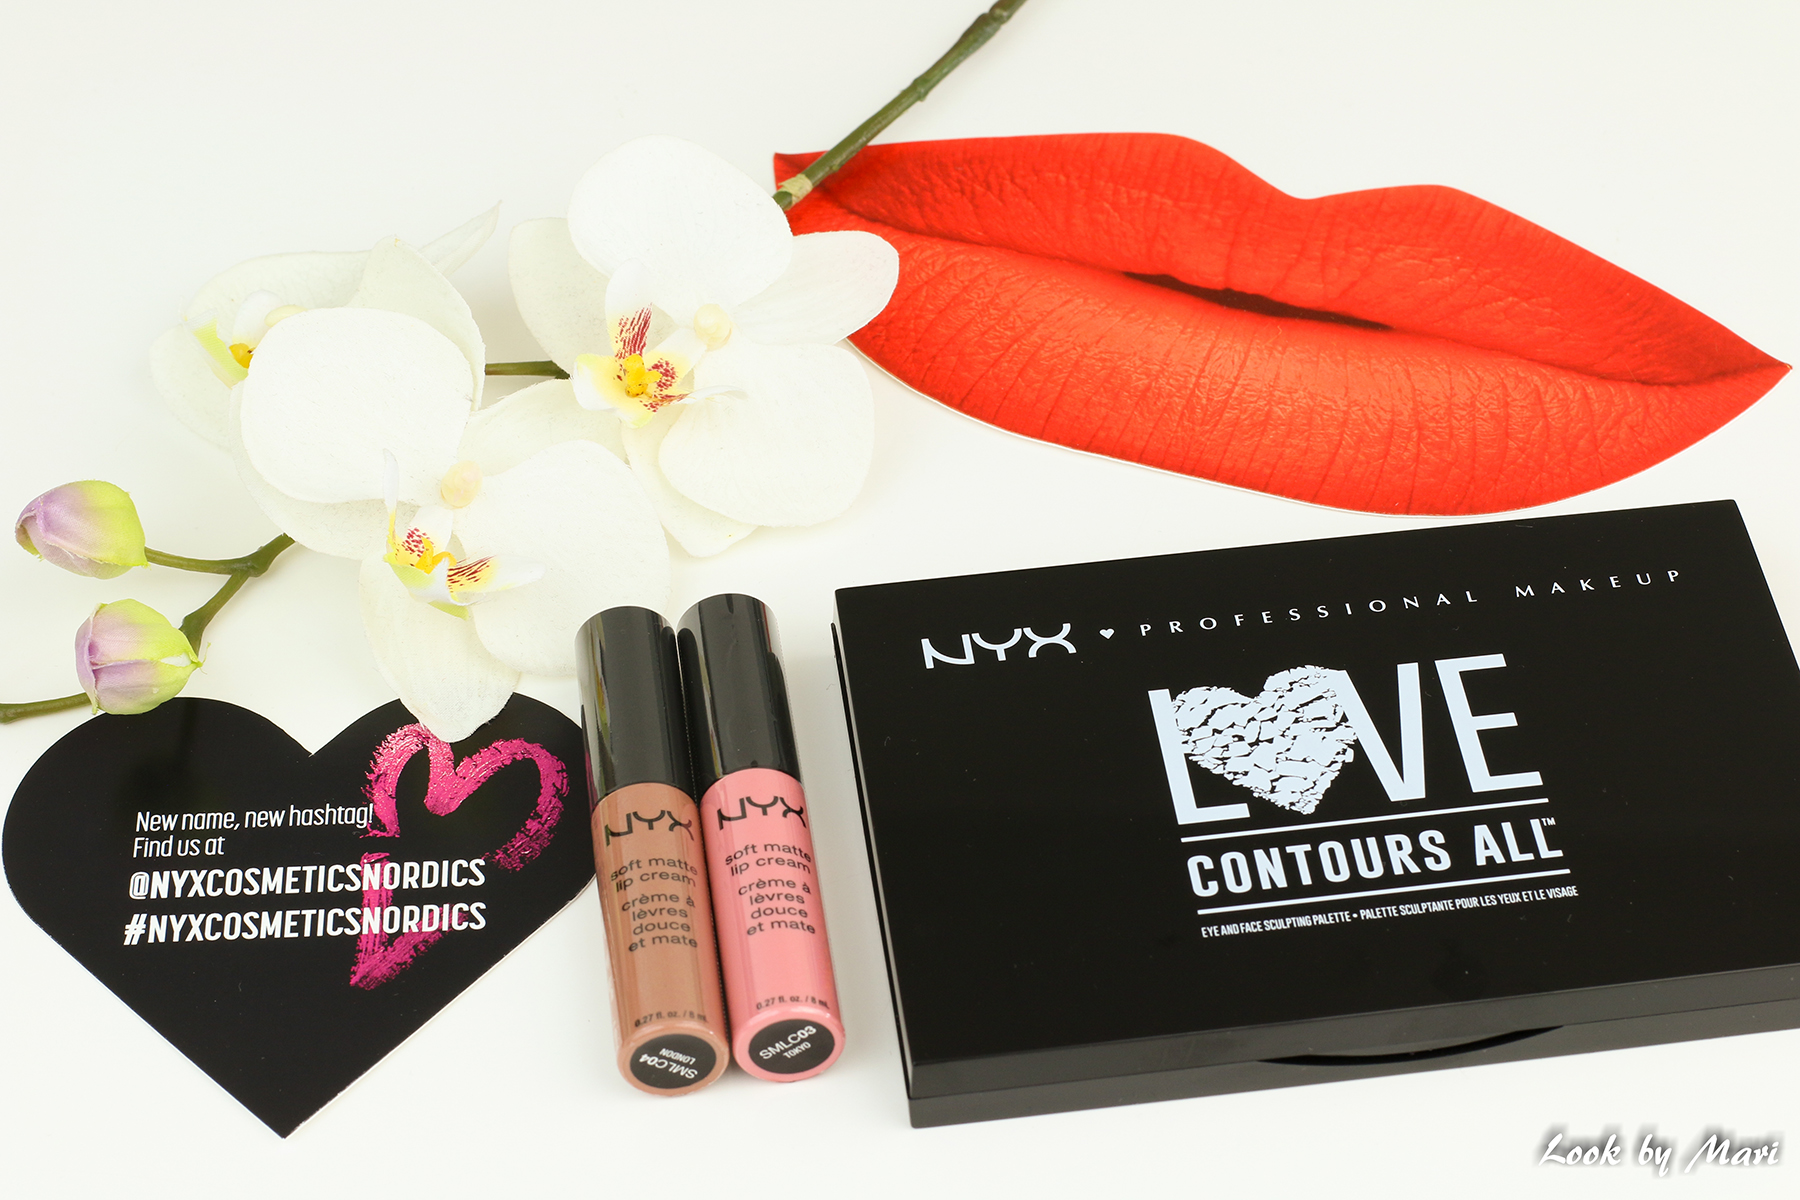 1 nyx love contours all palette review and swatches kokemuksia ja sävyt